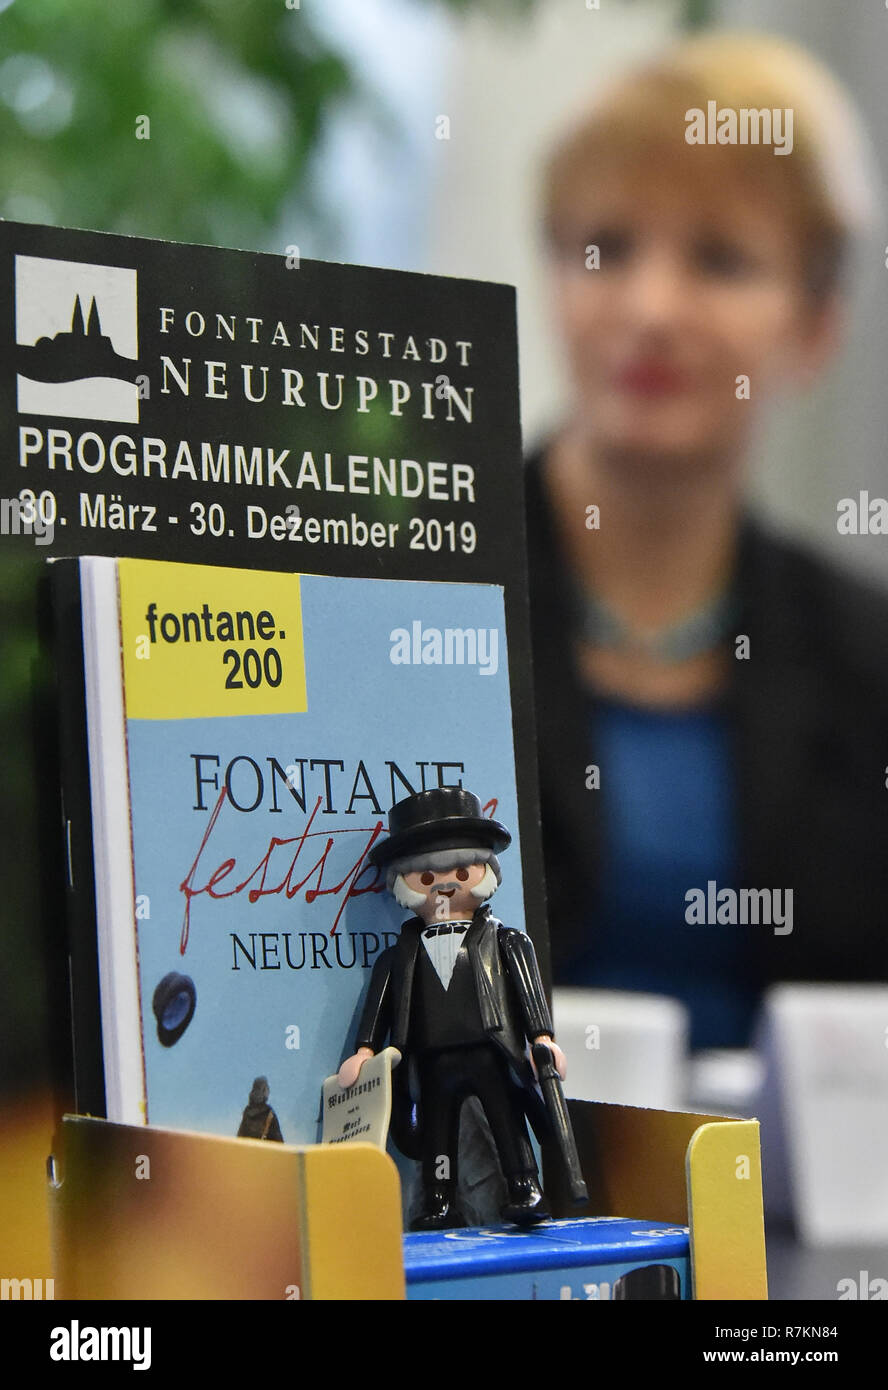 Potsdam, Germany. 10th Dec, 2018. Martina Münch (SPD), Brandenburg's Minister of Culture, sits behind the display during a press conference with the programmes for the Fontane Year and a toy figure from Fontane. The writer, journalist and author Theodor Fontane (1819-1898) is honoured on the occasion of his 200th birthday in the coming year in Brandenburg. Credit: Bernd Settnik/dpa-Zentralbild/dpa/Alamy Live News Stock Photo